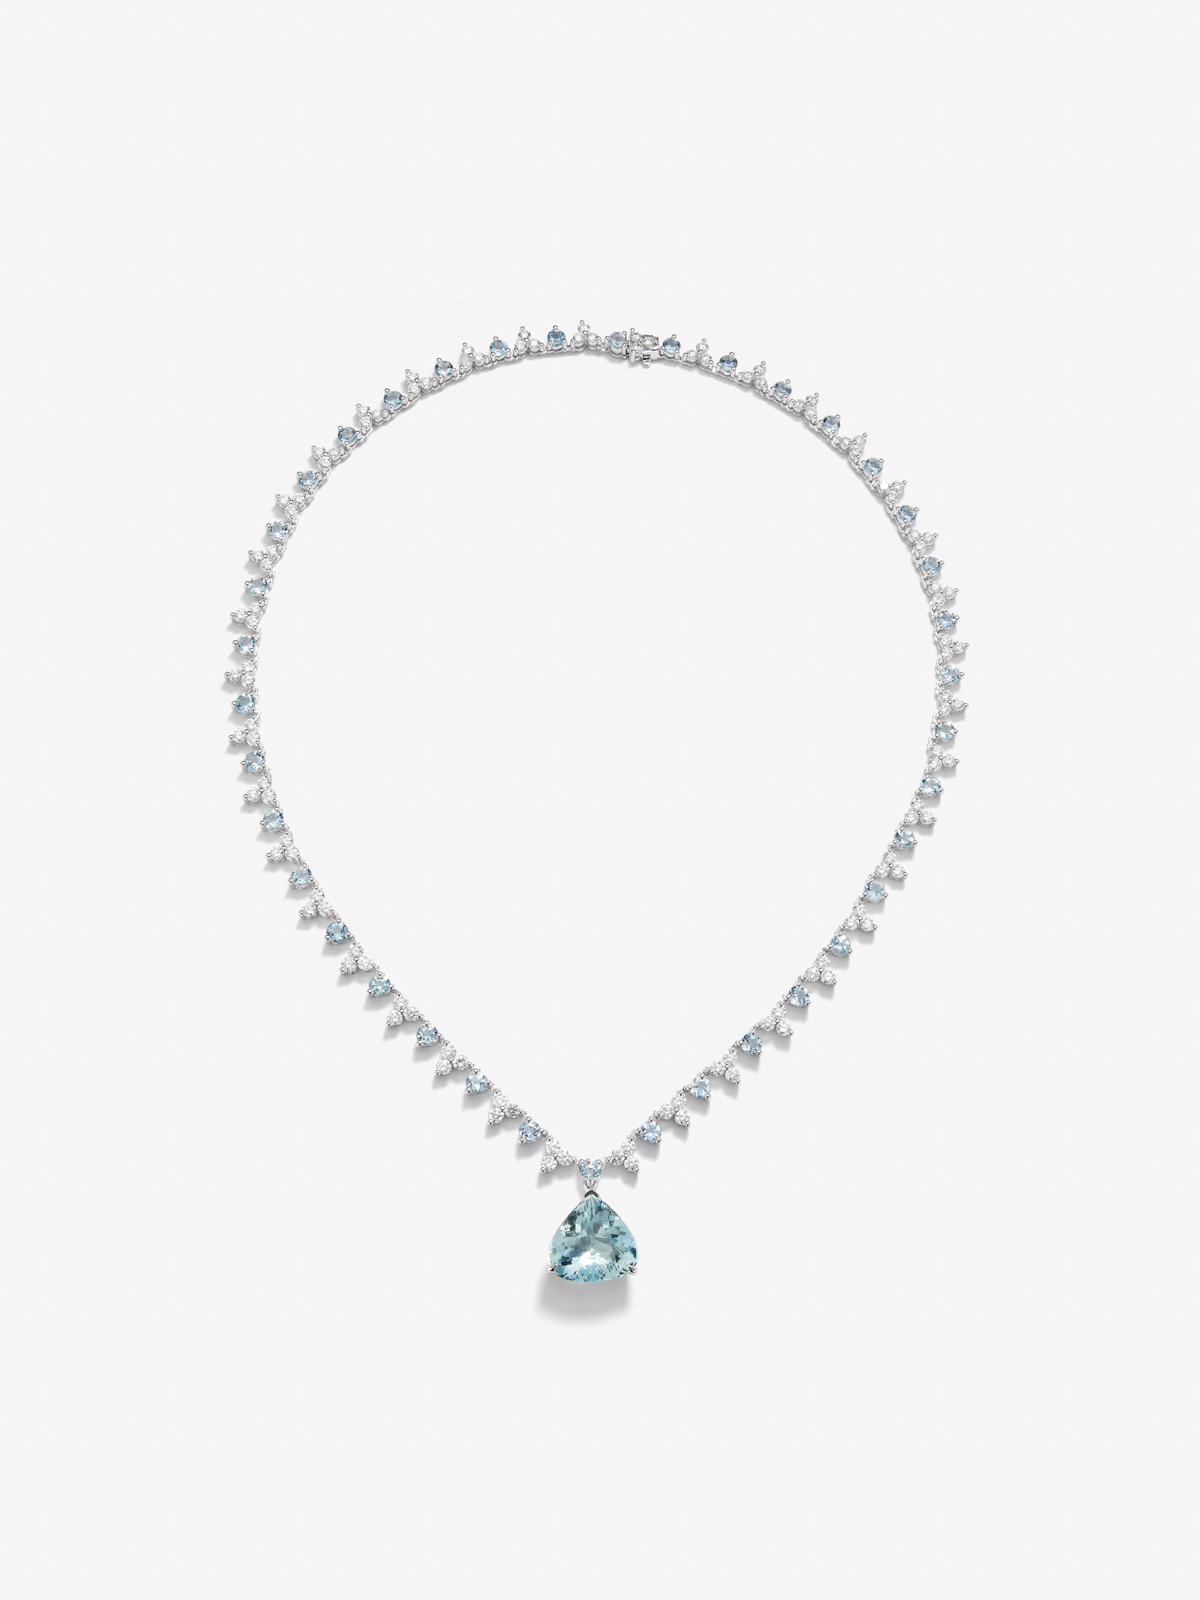 18K White Gold Rivière Necklace with Aguamarina Blue in 5.8 cts, blue aquamarines in a brilliant 5.41 cts and white diamonds in a bright size of 6.27 cts